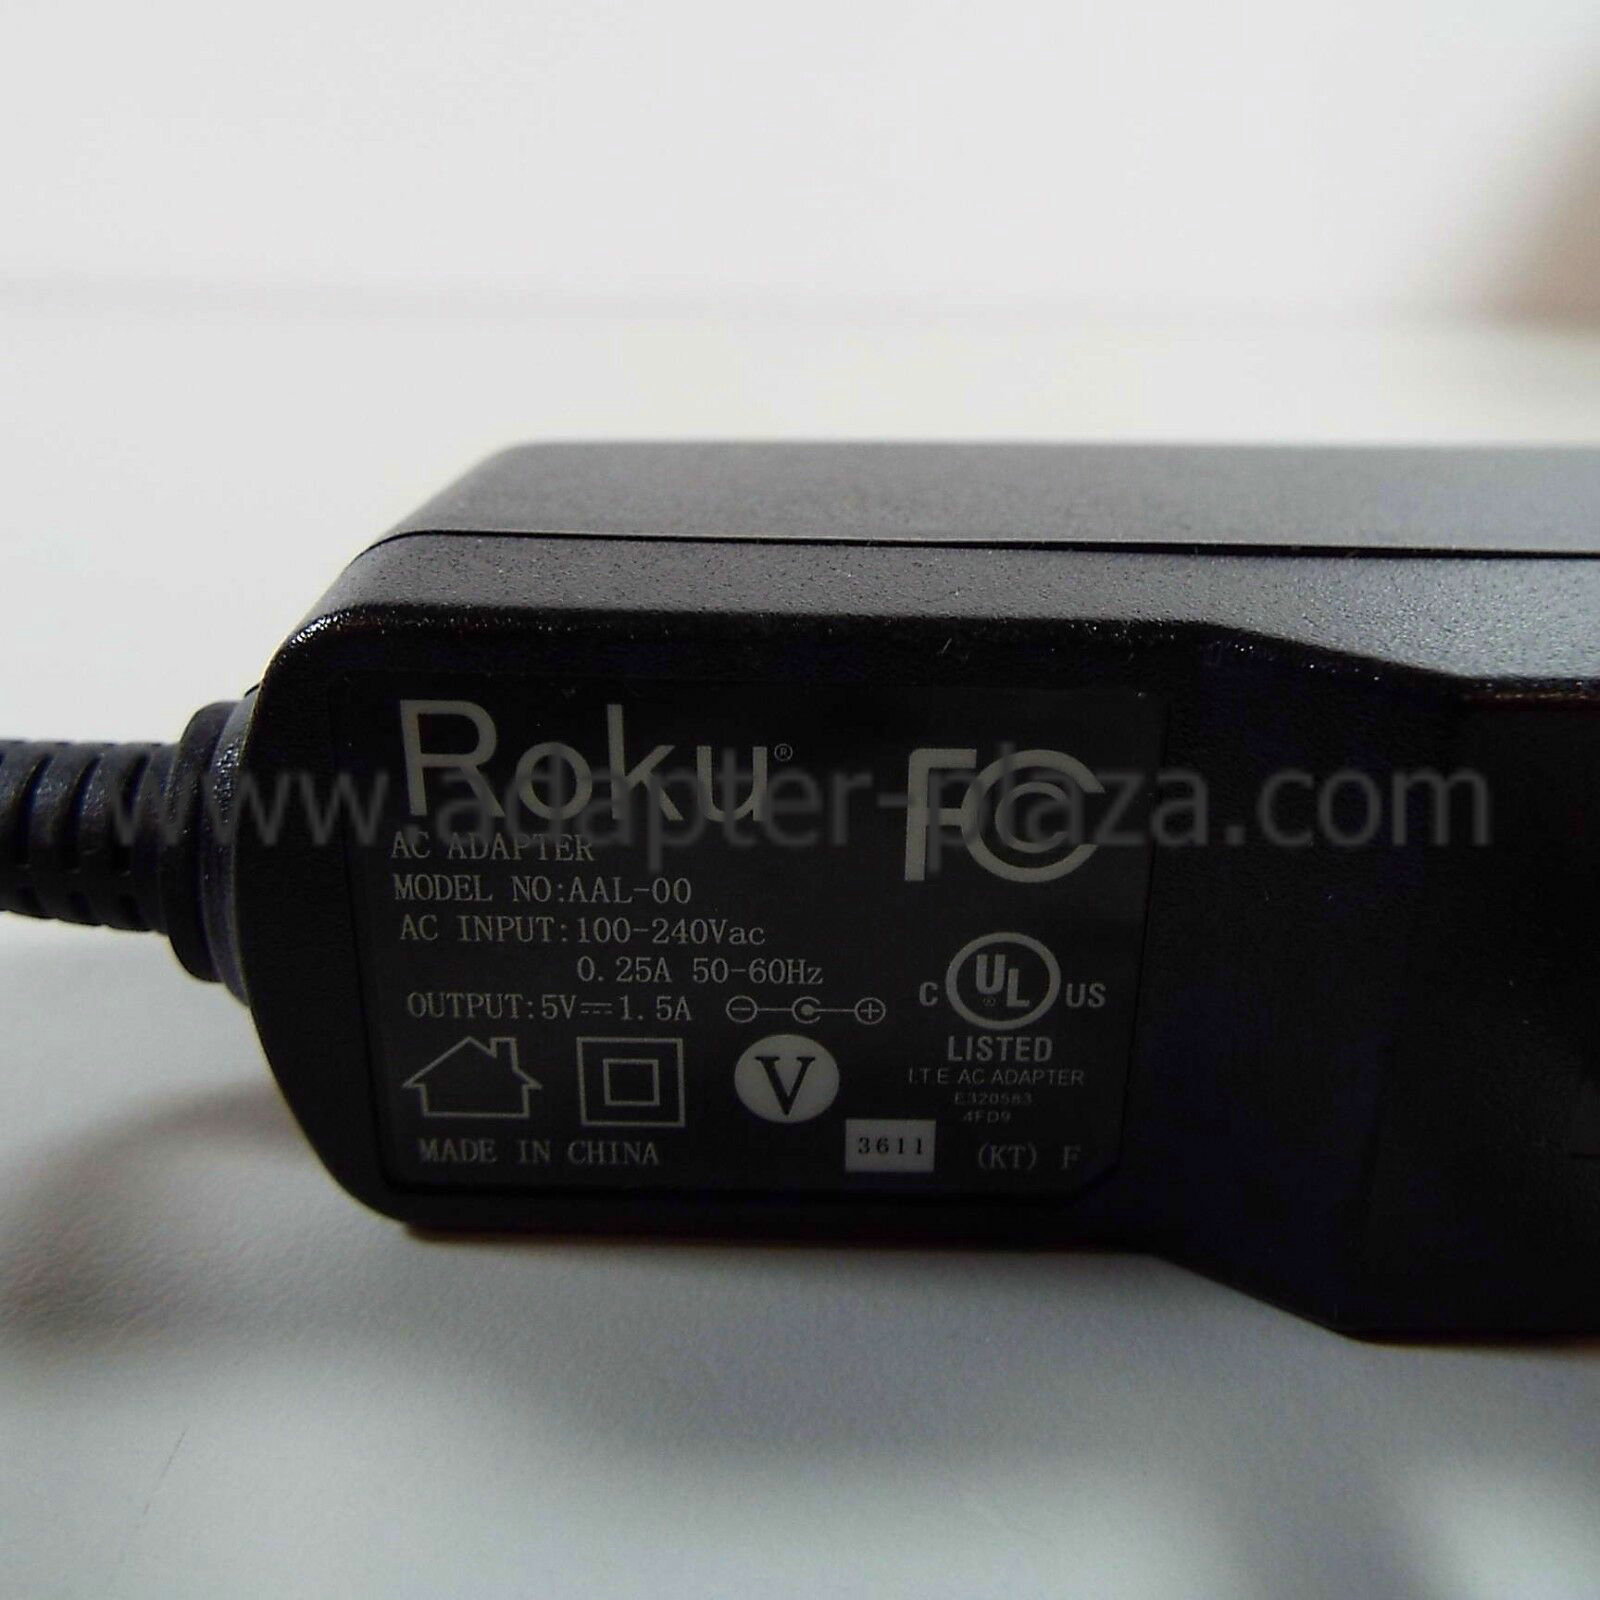 *Brand NEW* ROKU AAL-00 5V DC 1.5A AC DC Adapter POWER SUPPLY